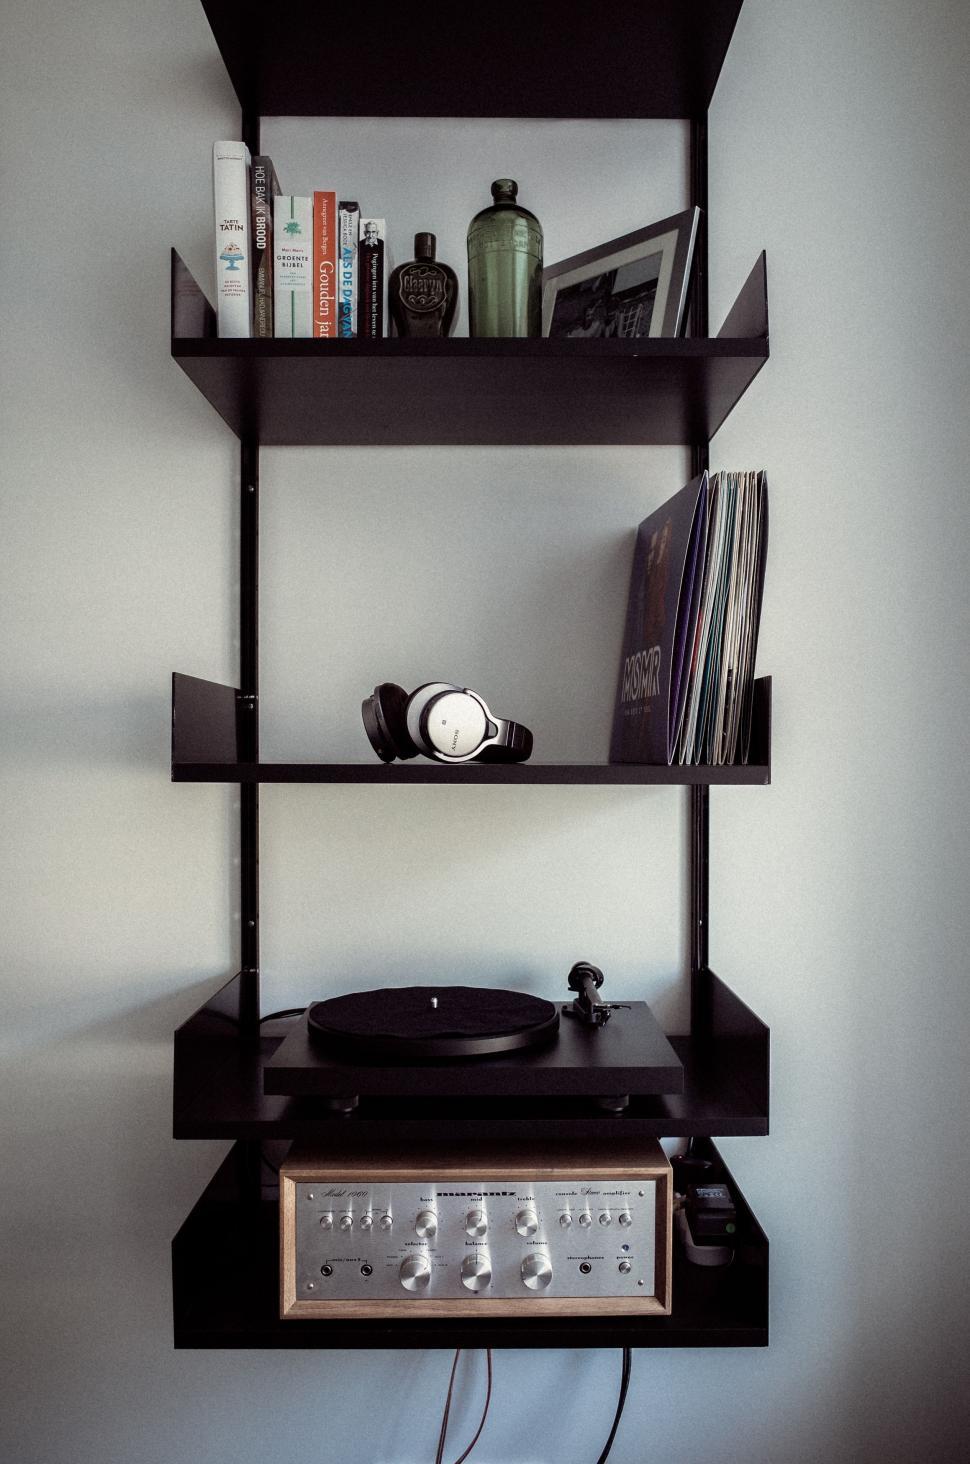 Free Image of Record Player on Shelf 